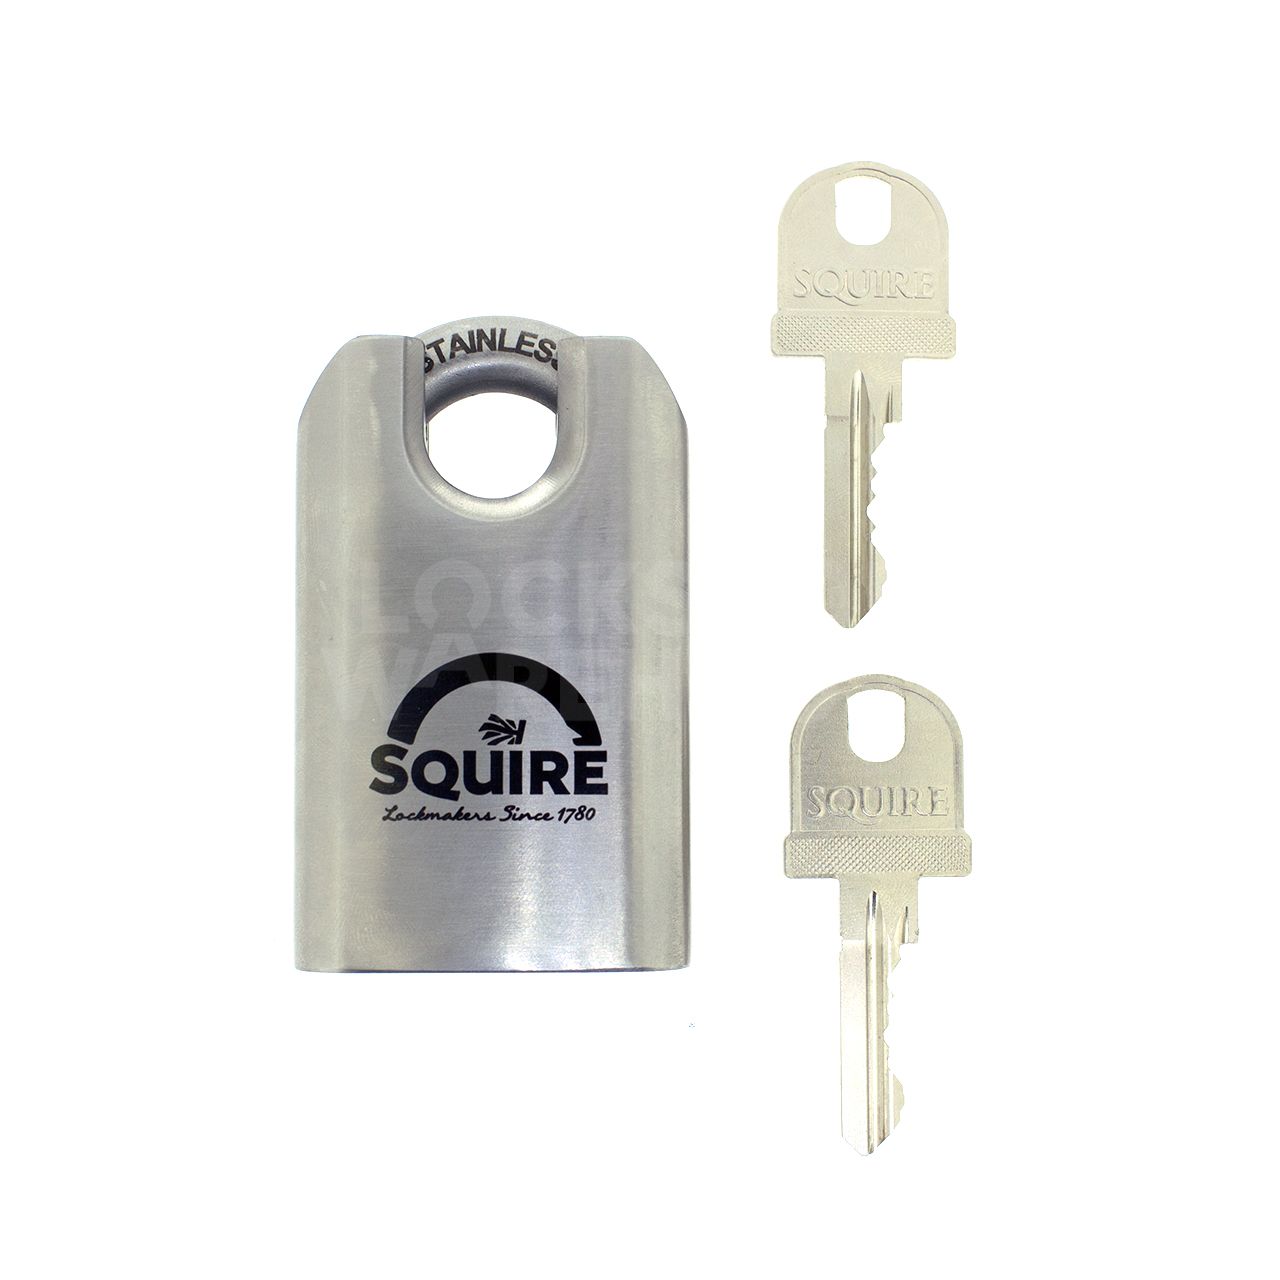 Dimensions Image: SQUIRE Stronghold® ST50CS - Closed Shackle - Stainless Steel Padlock